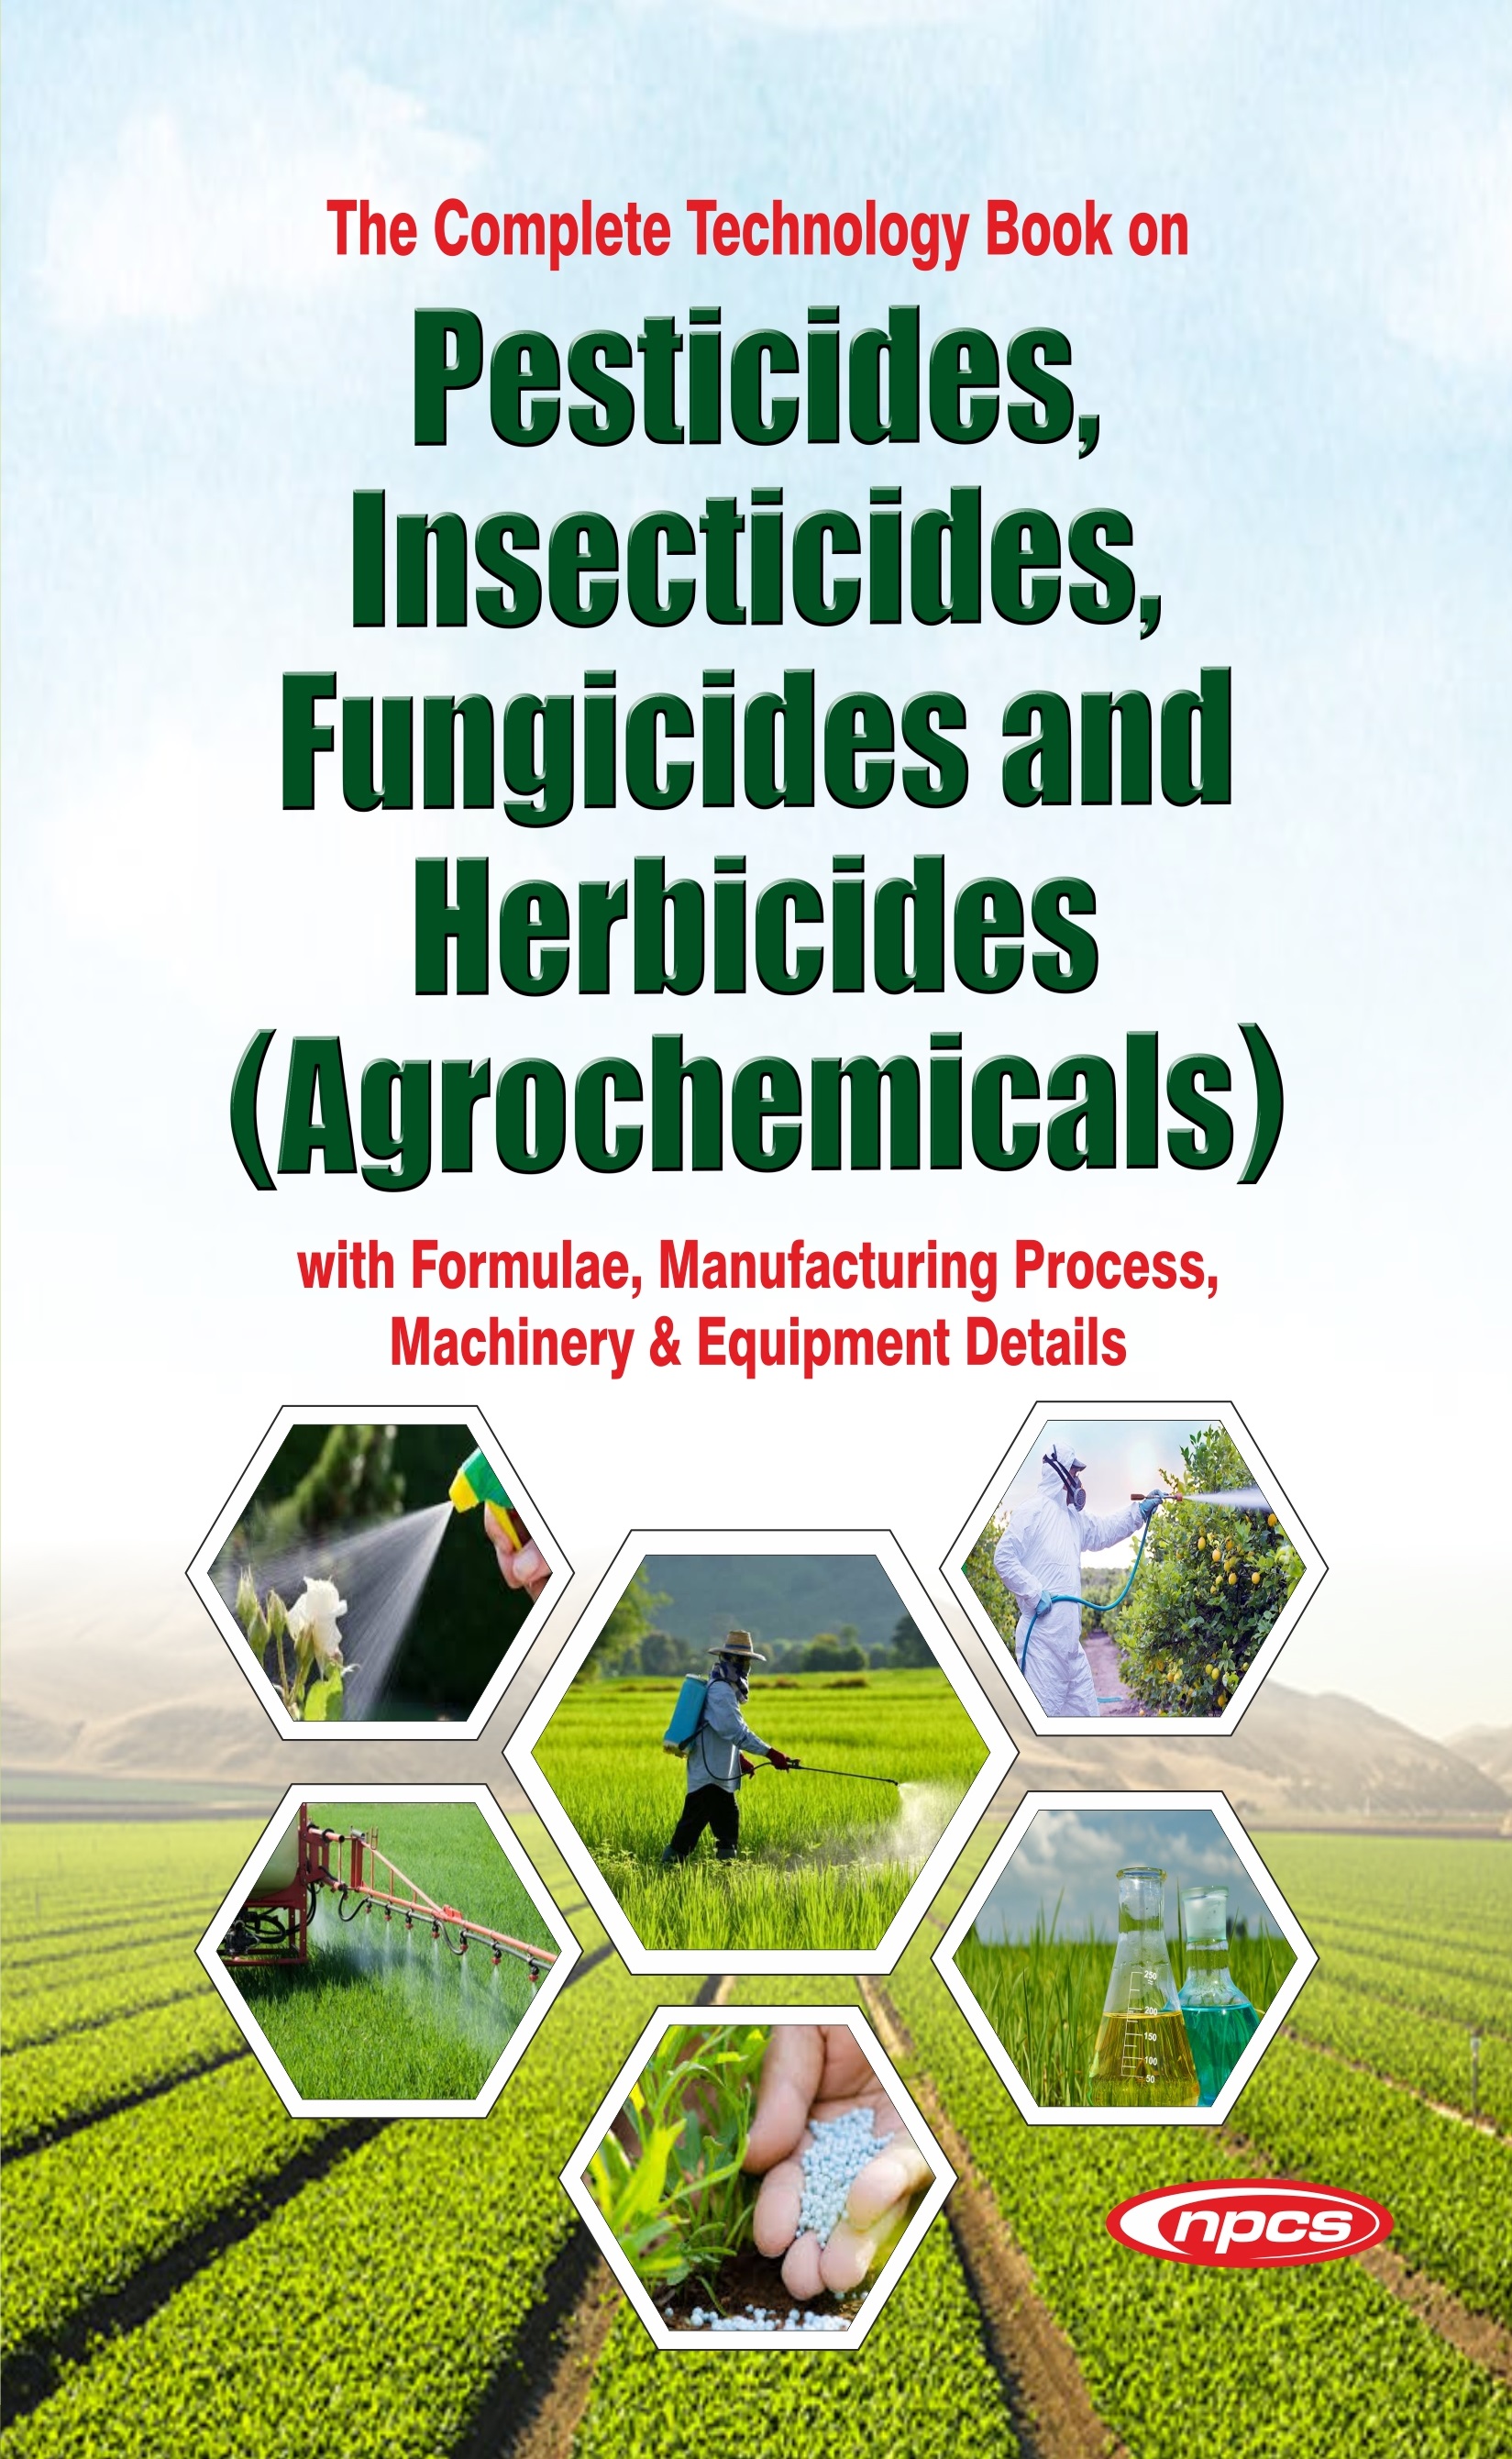 The Complete Technology Book on Pesticides, Insecticides, Fungicides